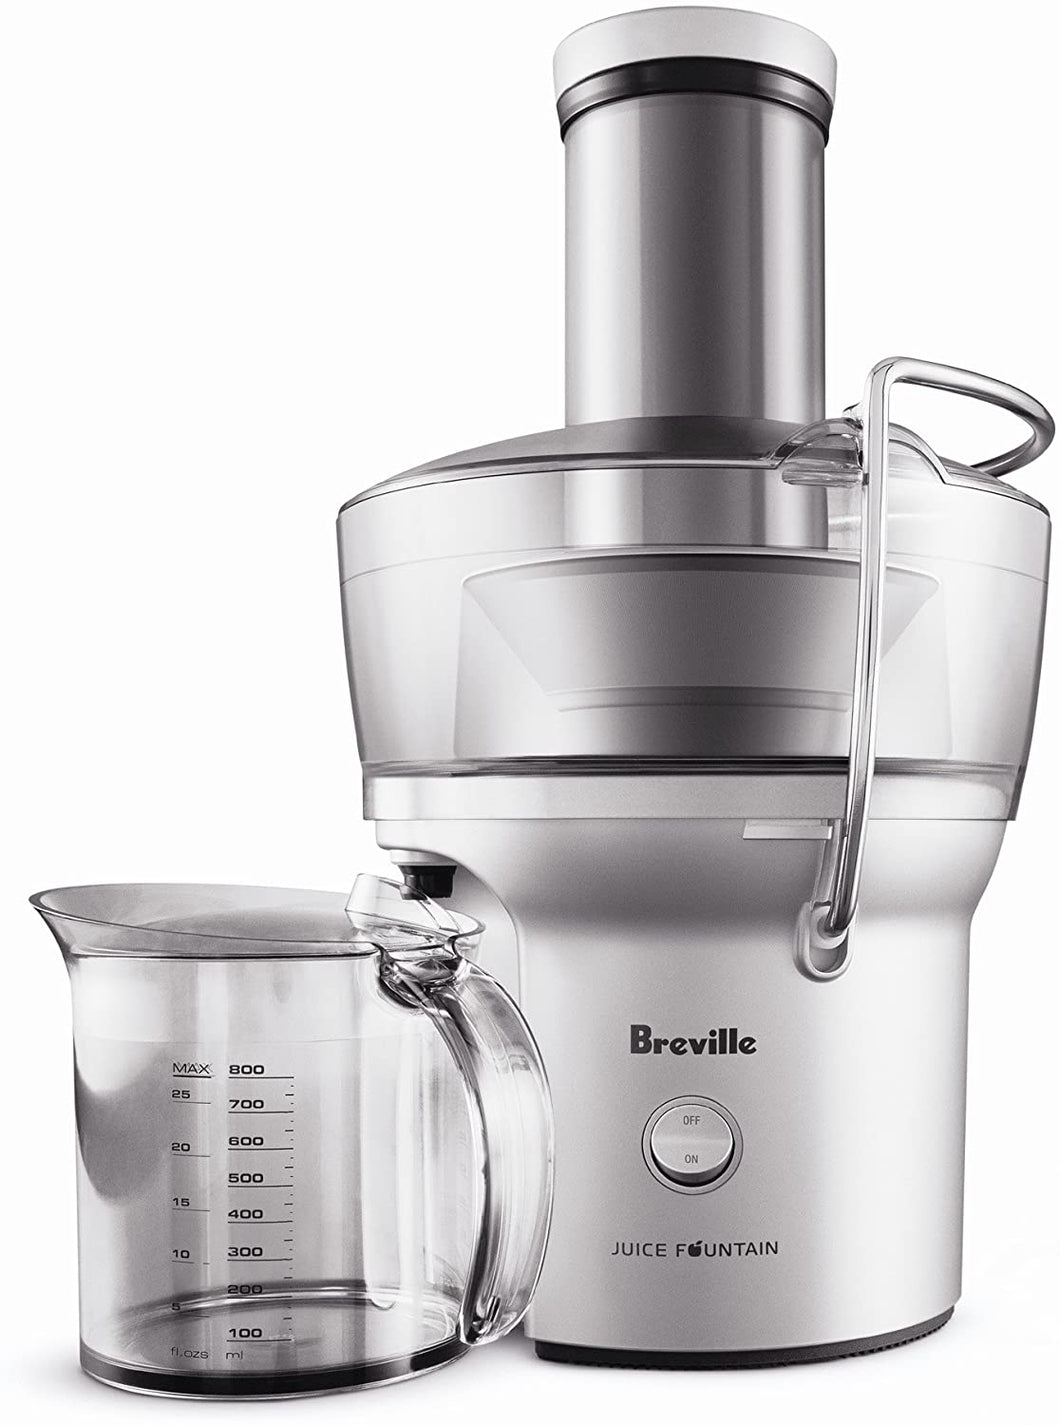 Breville BJE200XL Juice Fountain Compact Juicer, Silver